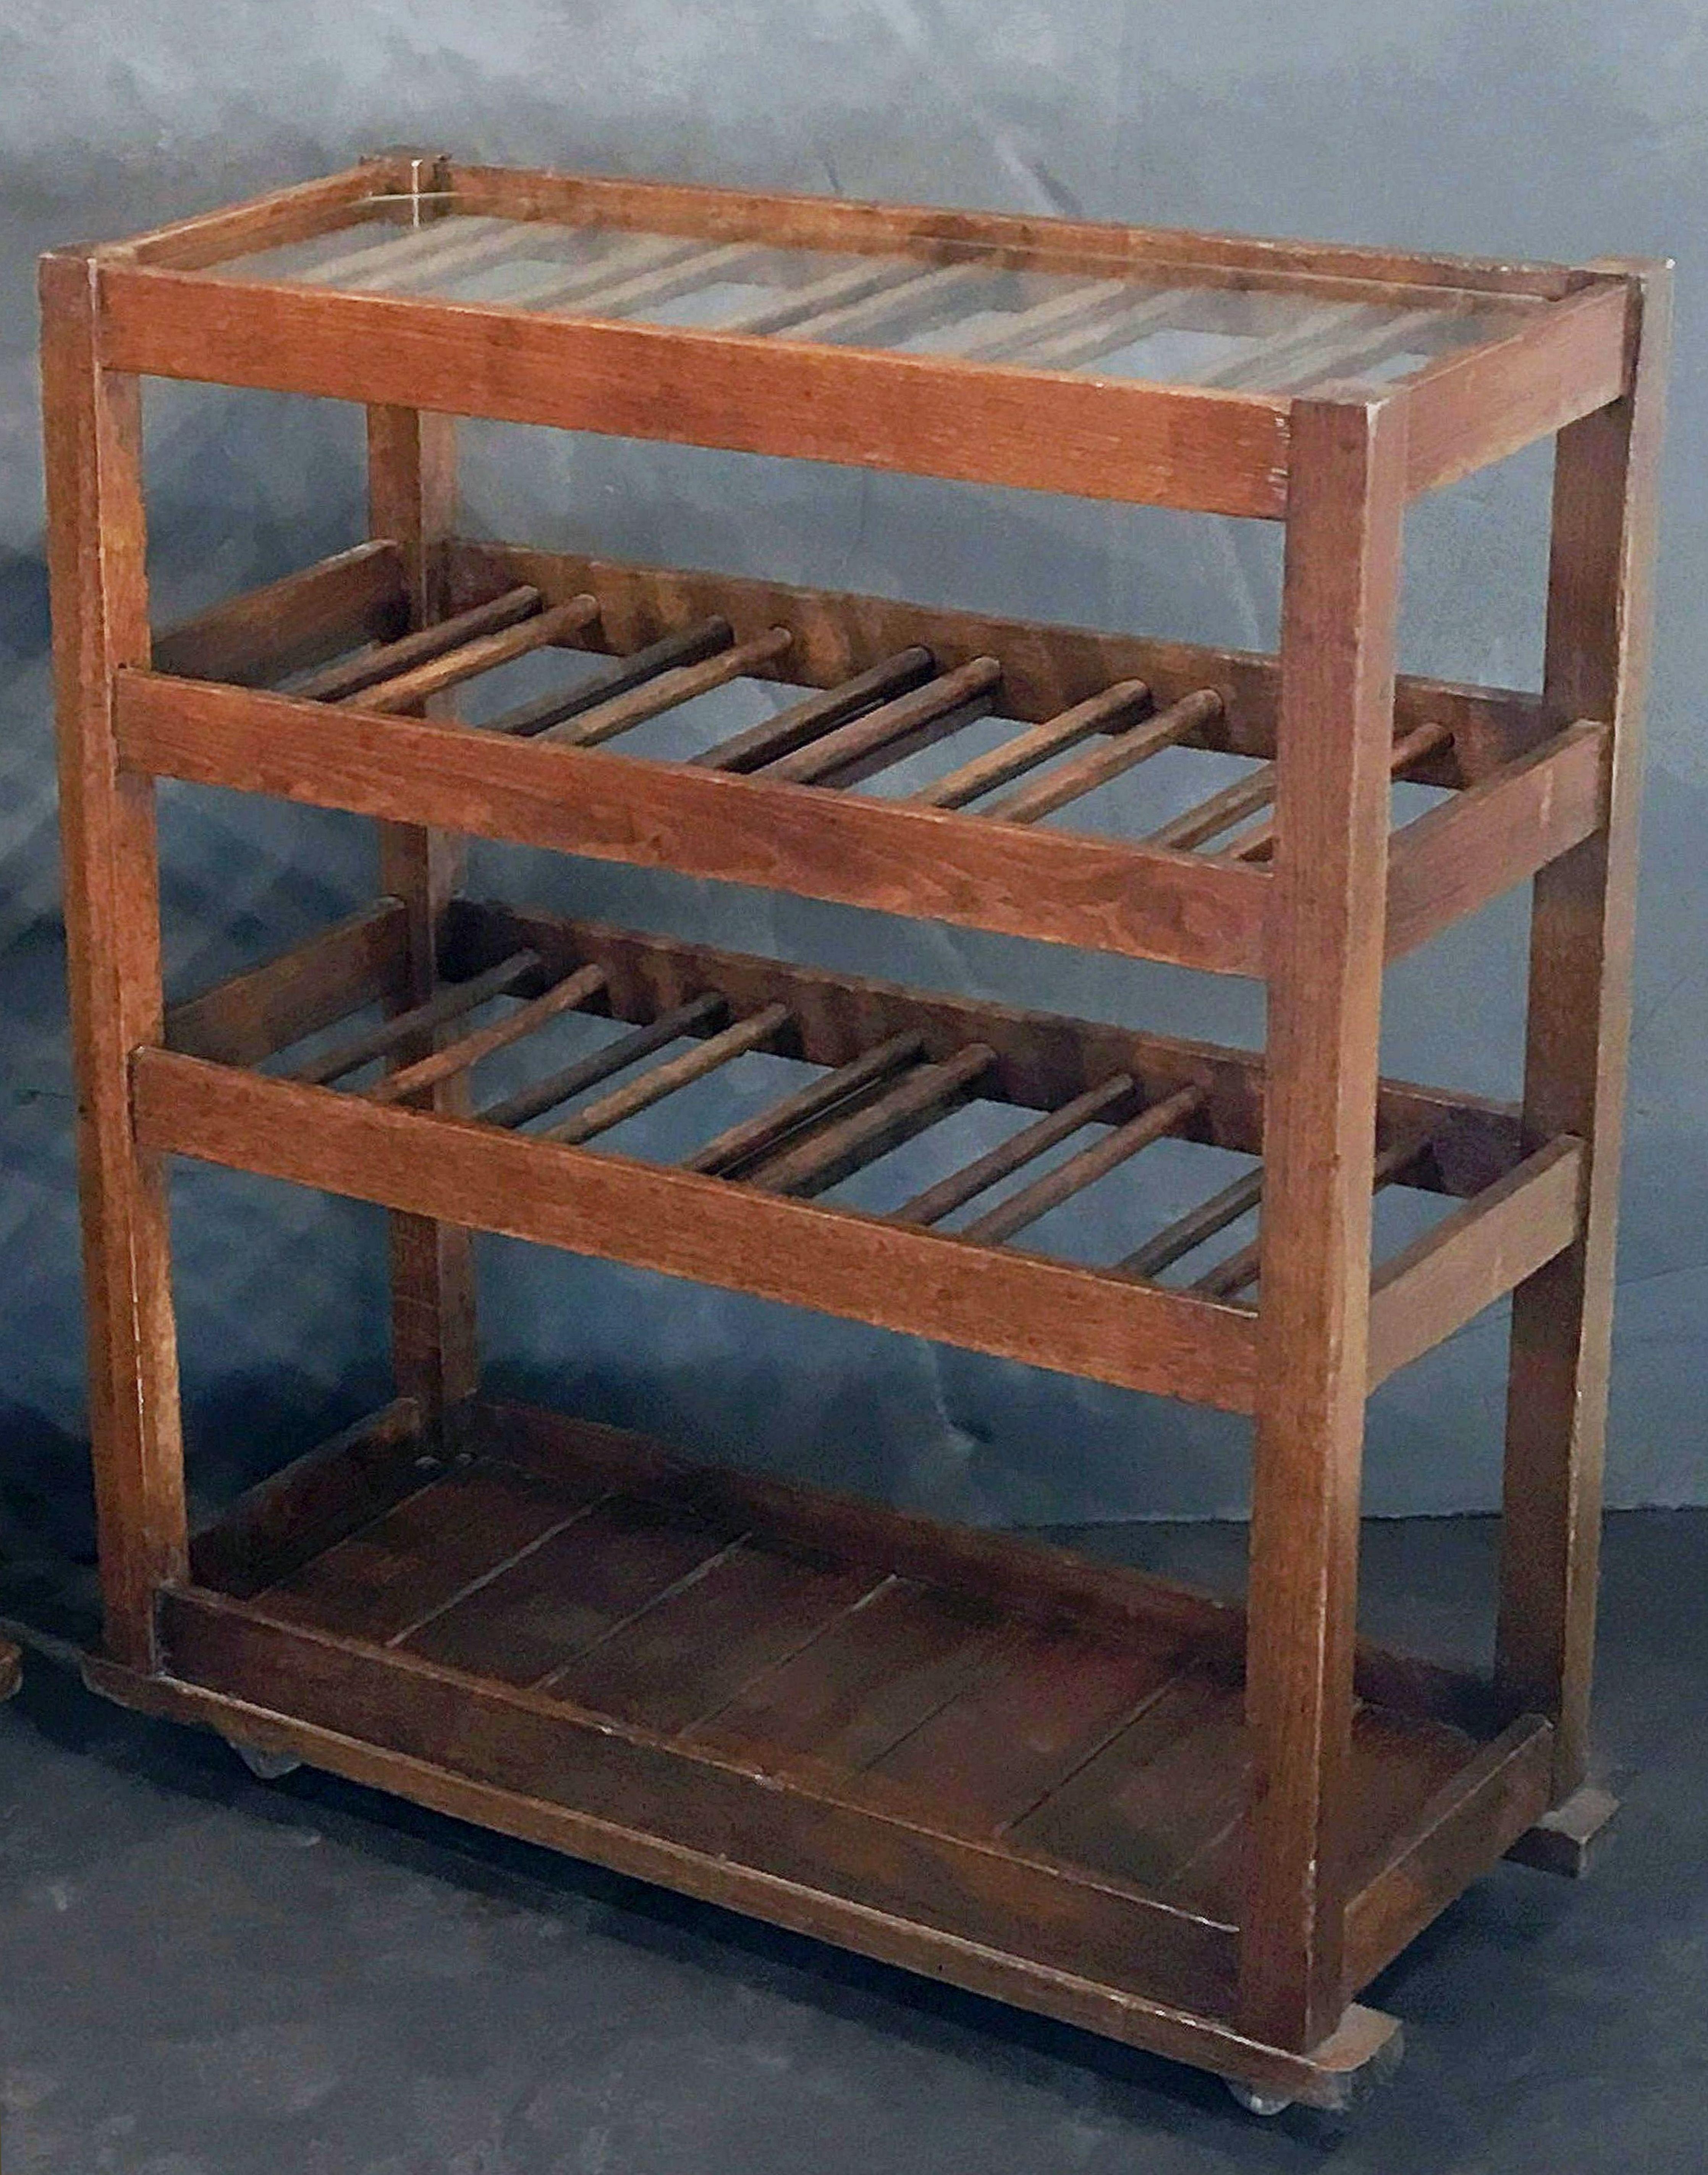 A fine French sommelier or wine tasting table, featuring a removable fitted glass top, upon a frame with two slatted shelves, designed for the presentation of bottles of wine, over a bottom shelf, and set upon four casters.

Note: The casters are